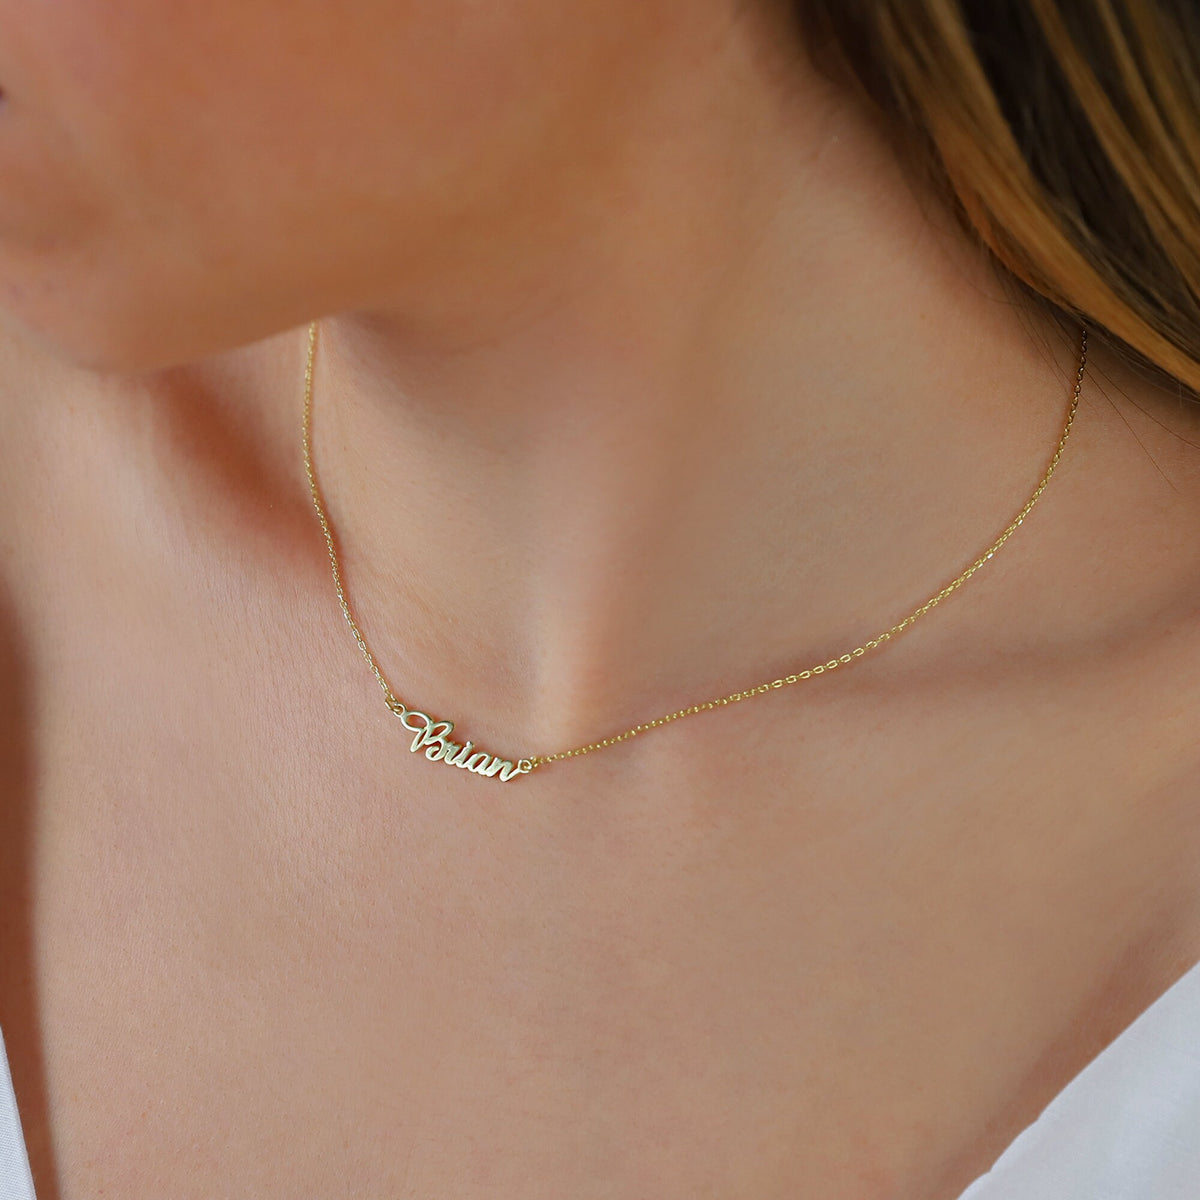 Handmade Memorial Family Multiple Name Necklace • Dainty Gold Double Two Name Necklace with Birthstone • Birthday, Christmas Gifts for Her